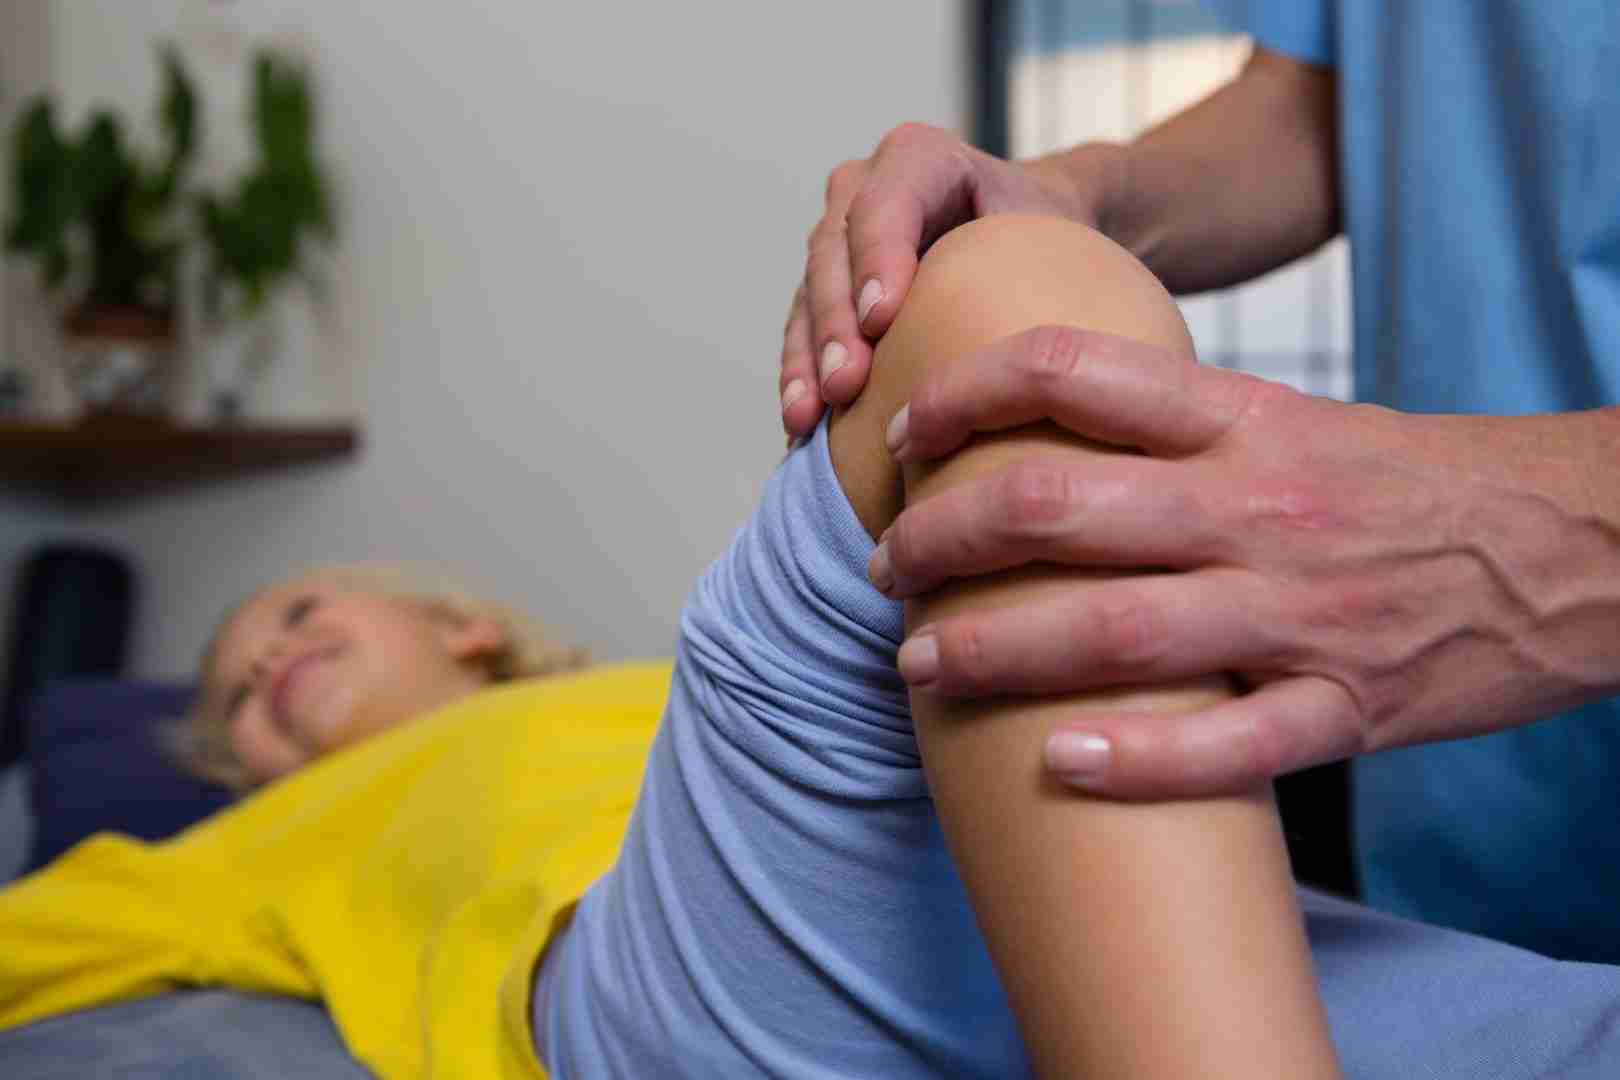 A physical therapist from Austin Manual Therapy Associates in blue scrubs uses their hands to examine the knee of a patient wearing a yellow shirt. The patient is lying on a treatment table with their leg bent at the knee and appears to be relaxed.